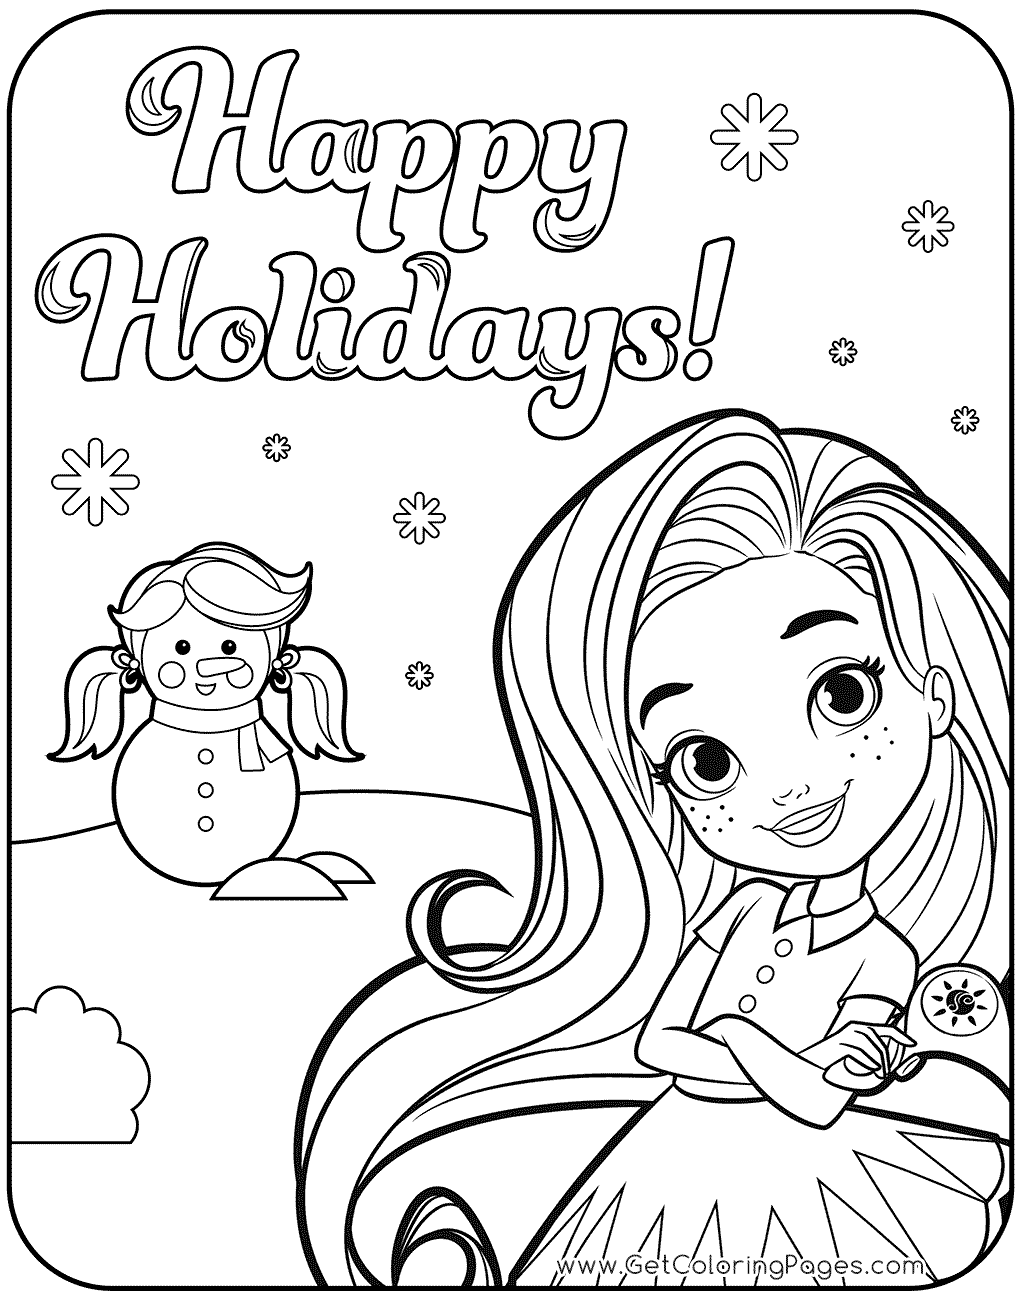 Sunny Day Coloring Pages At GetColorings Free Printable Colorings